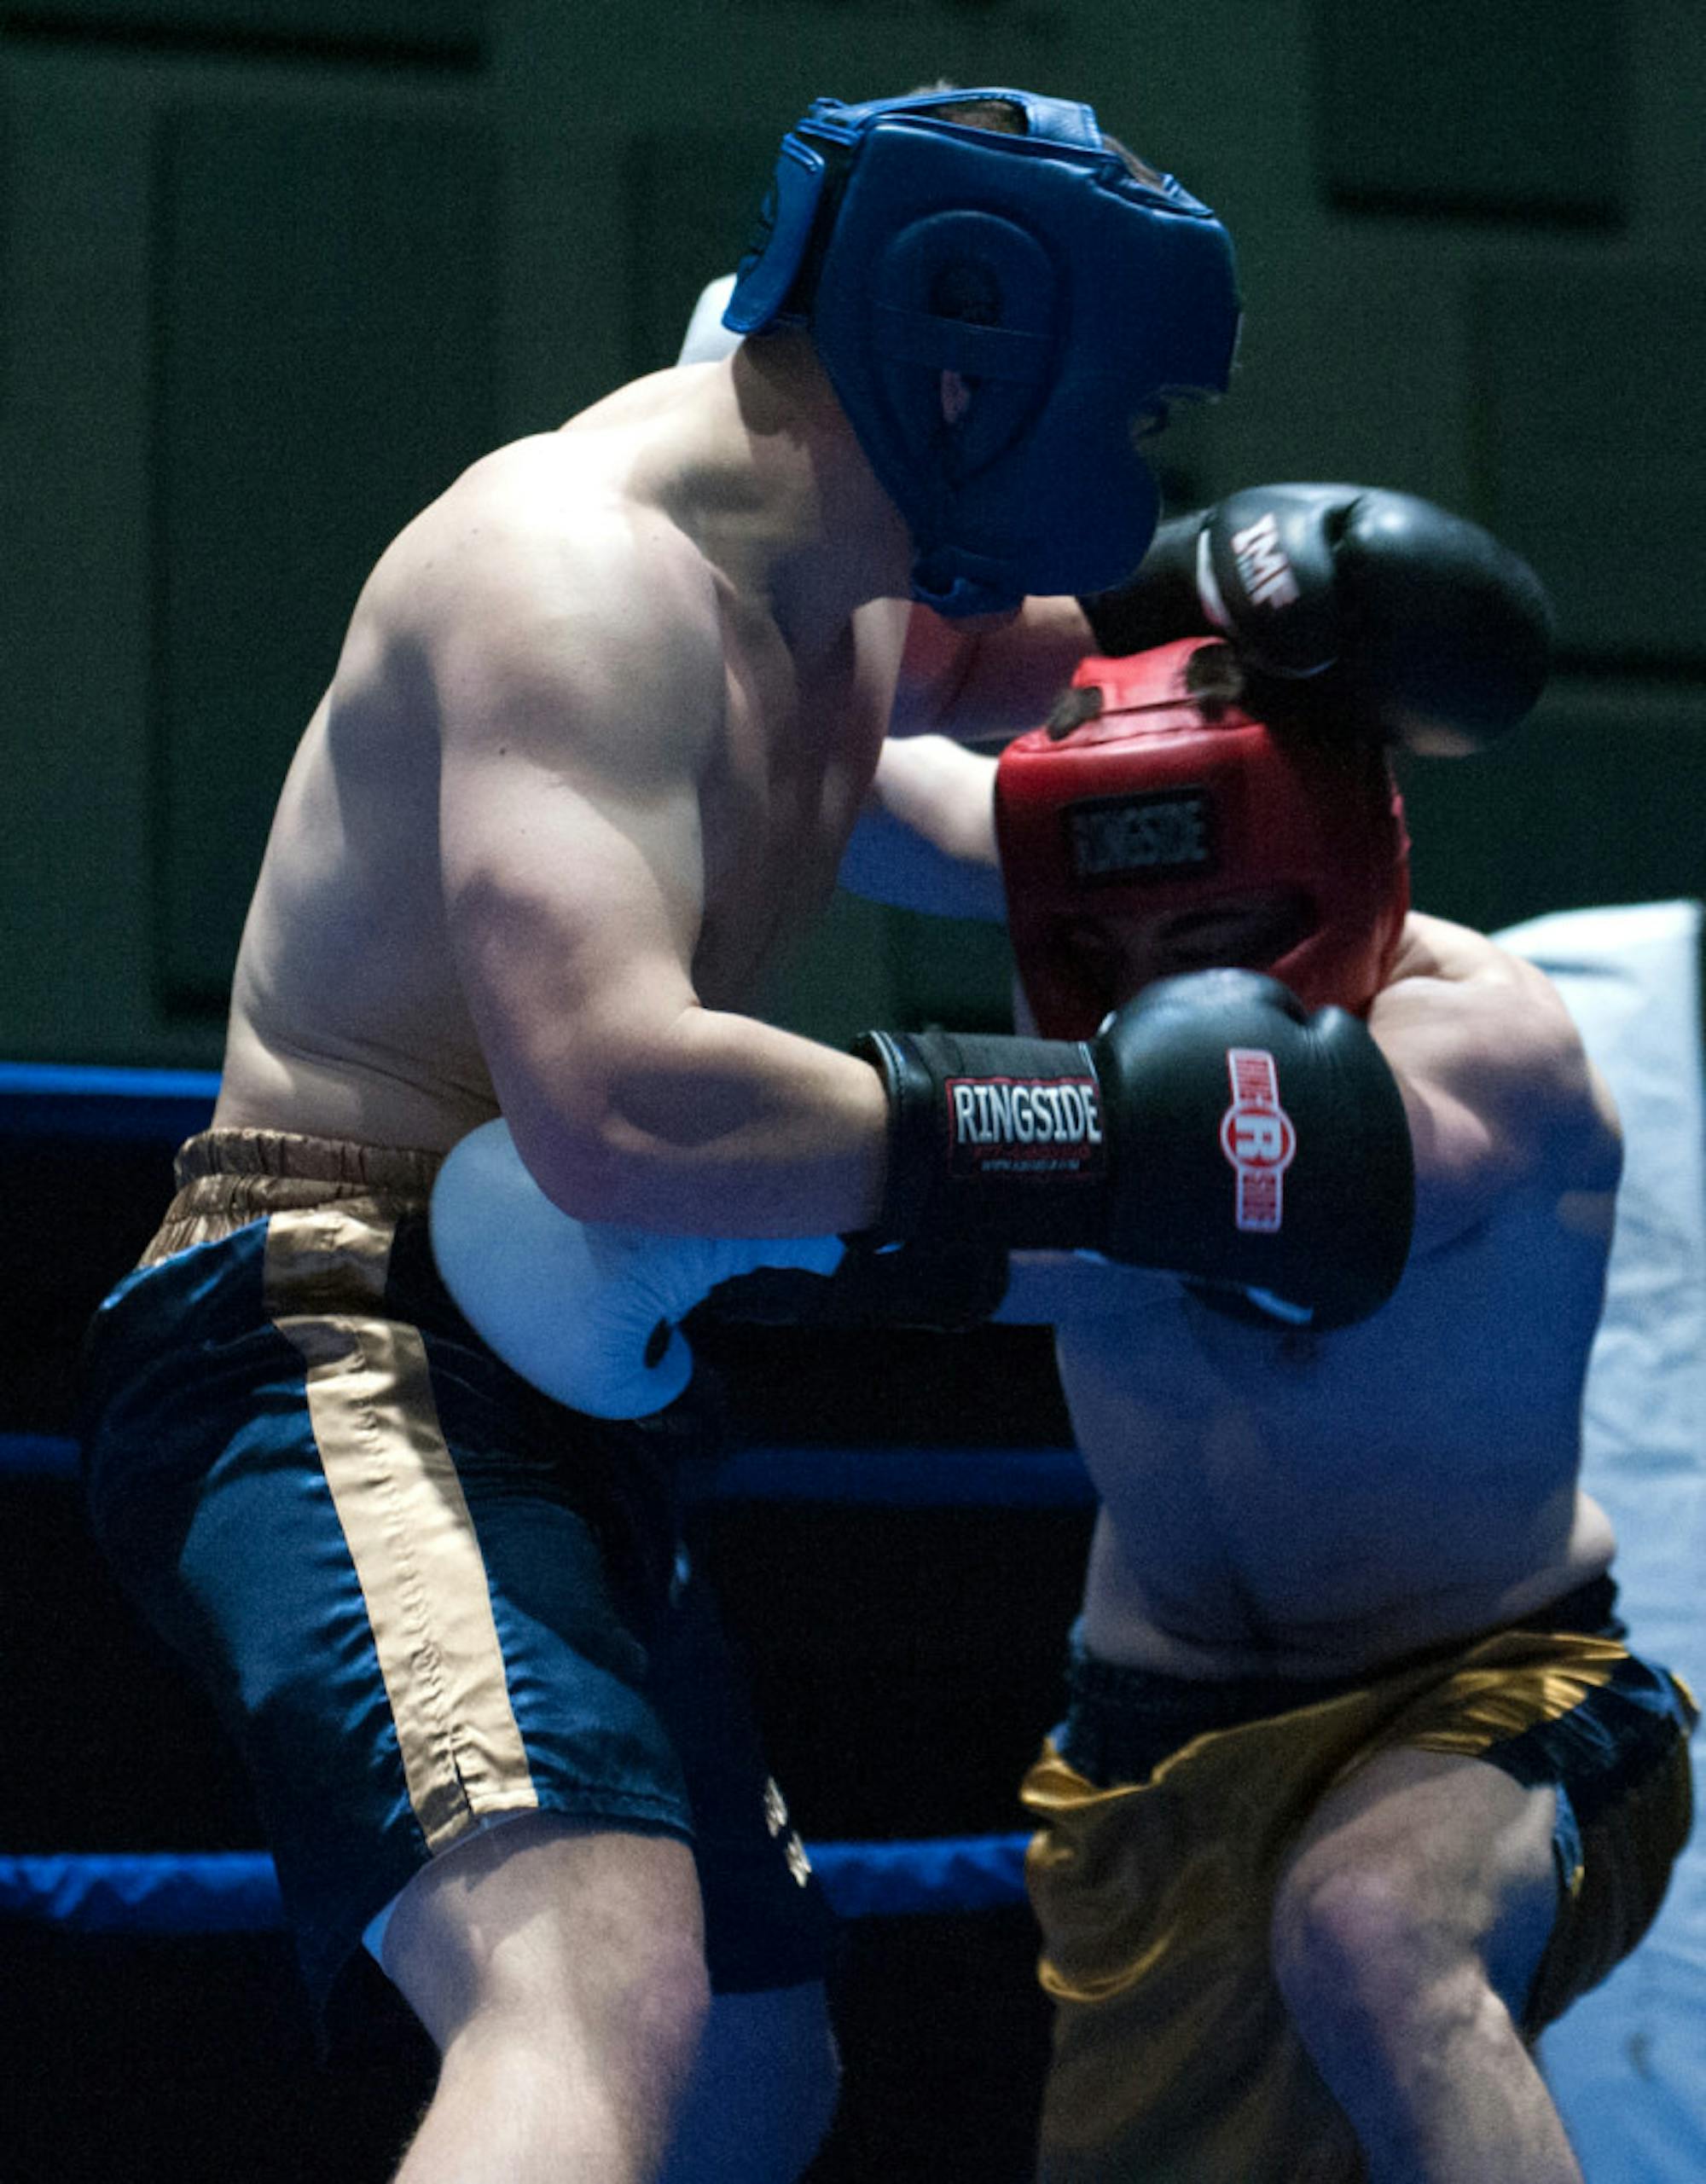 Senior Bryan Cooley, left, defends an attack from graduate student C.J. Pruner during Tuesdays’ 184-pound semifinal bout.